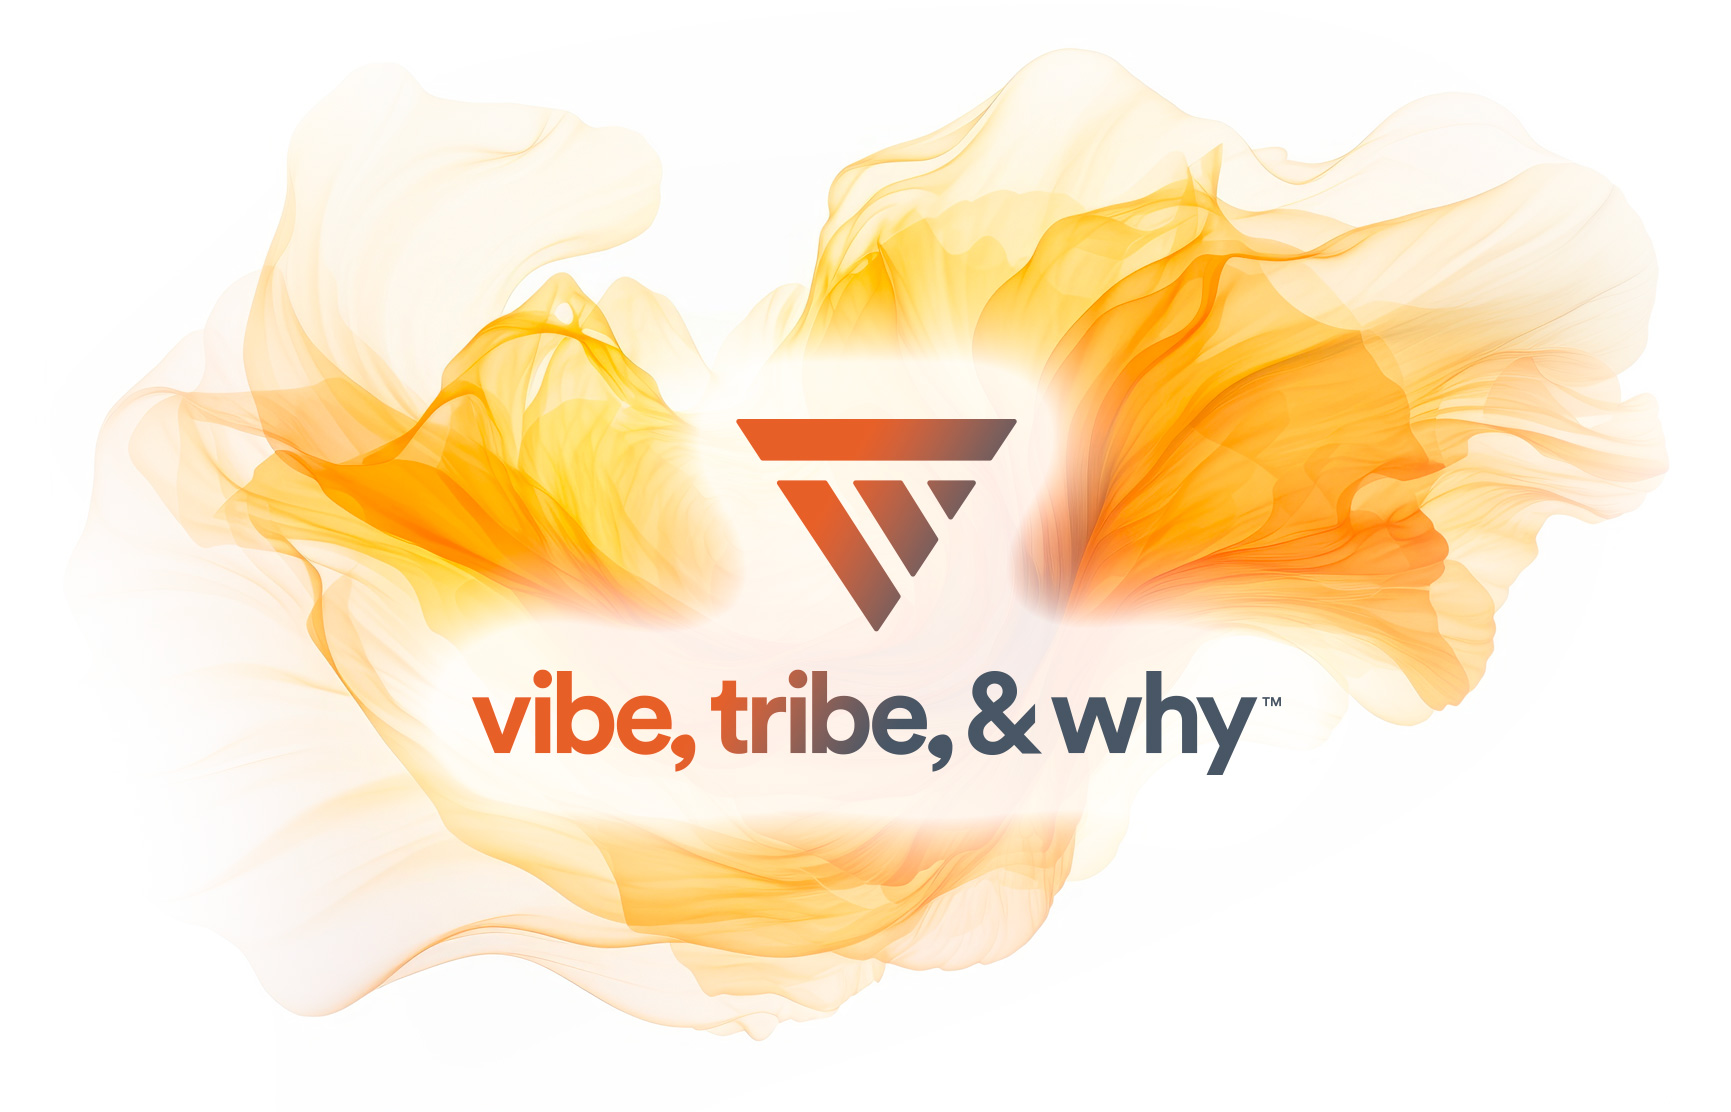 Vibe, Tribe, & Why™ - what we will clarify